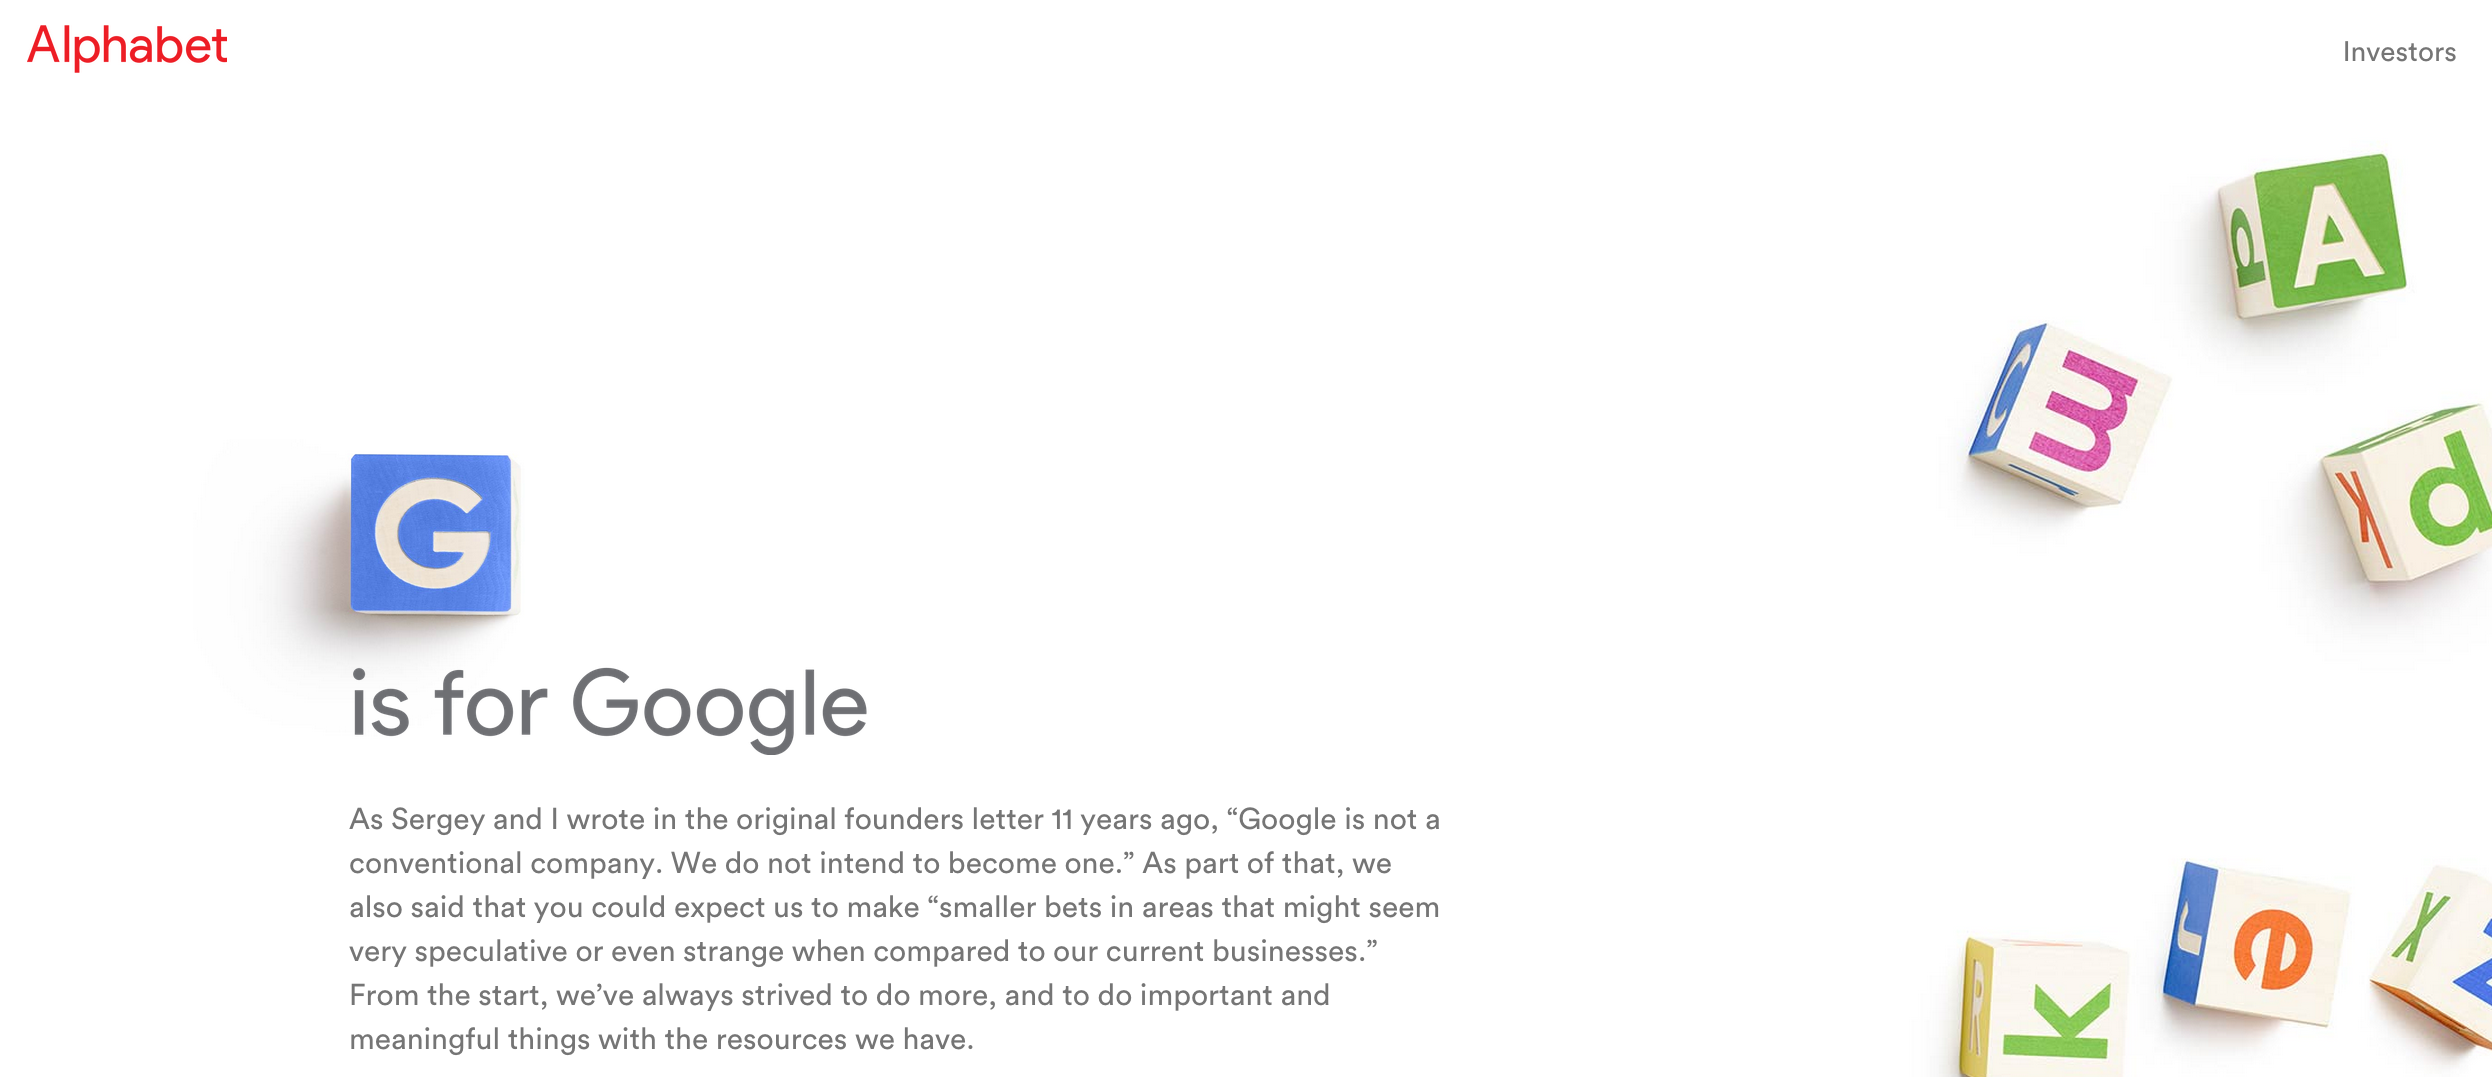 The message posted today by CEO Larry Page on ABC.xyz, the homepage of Alphabet Inc.